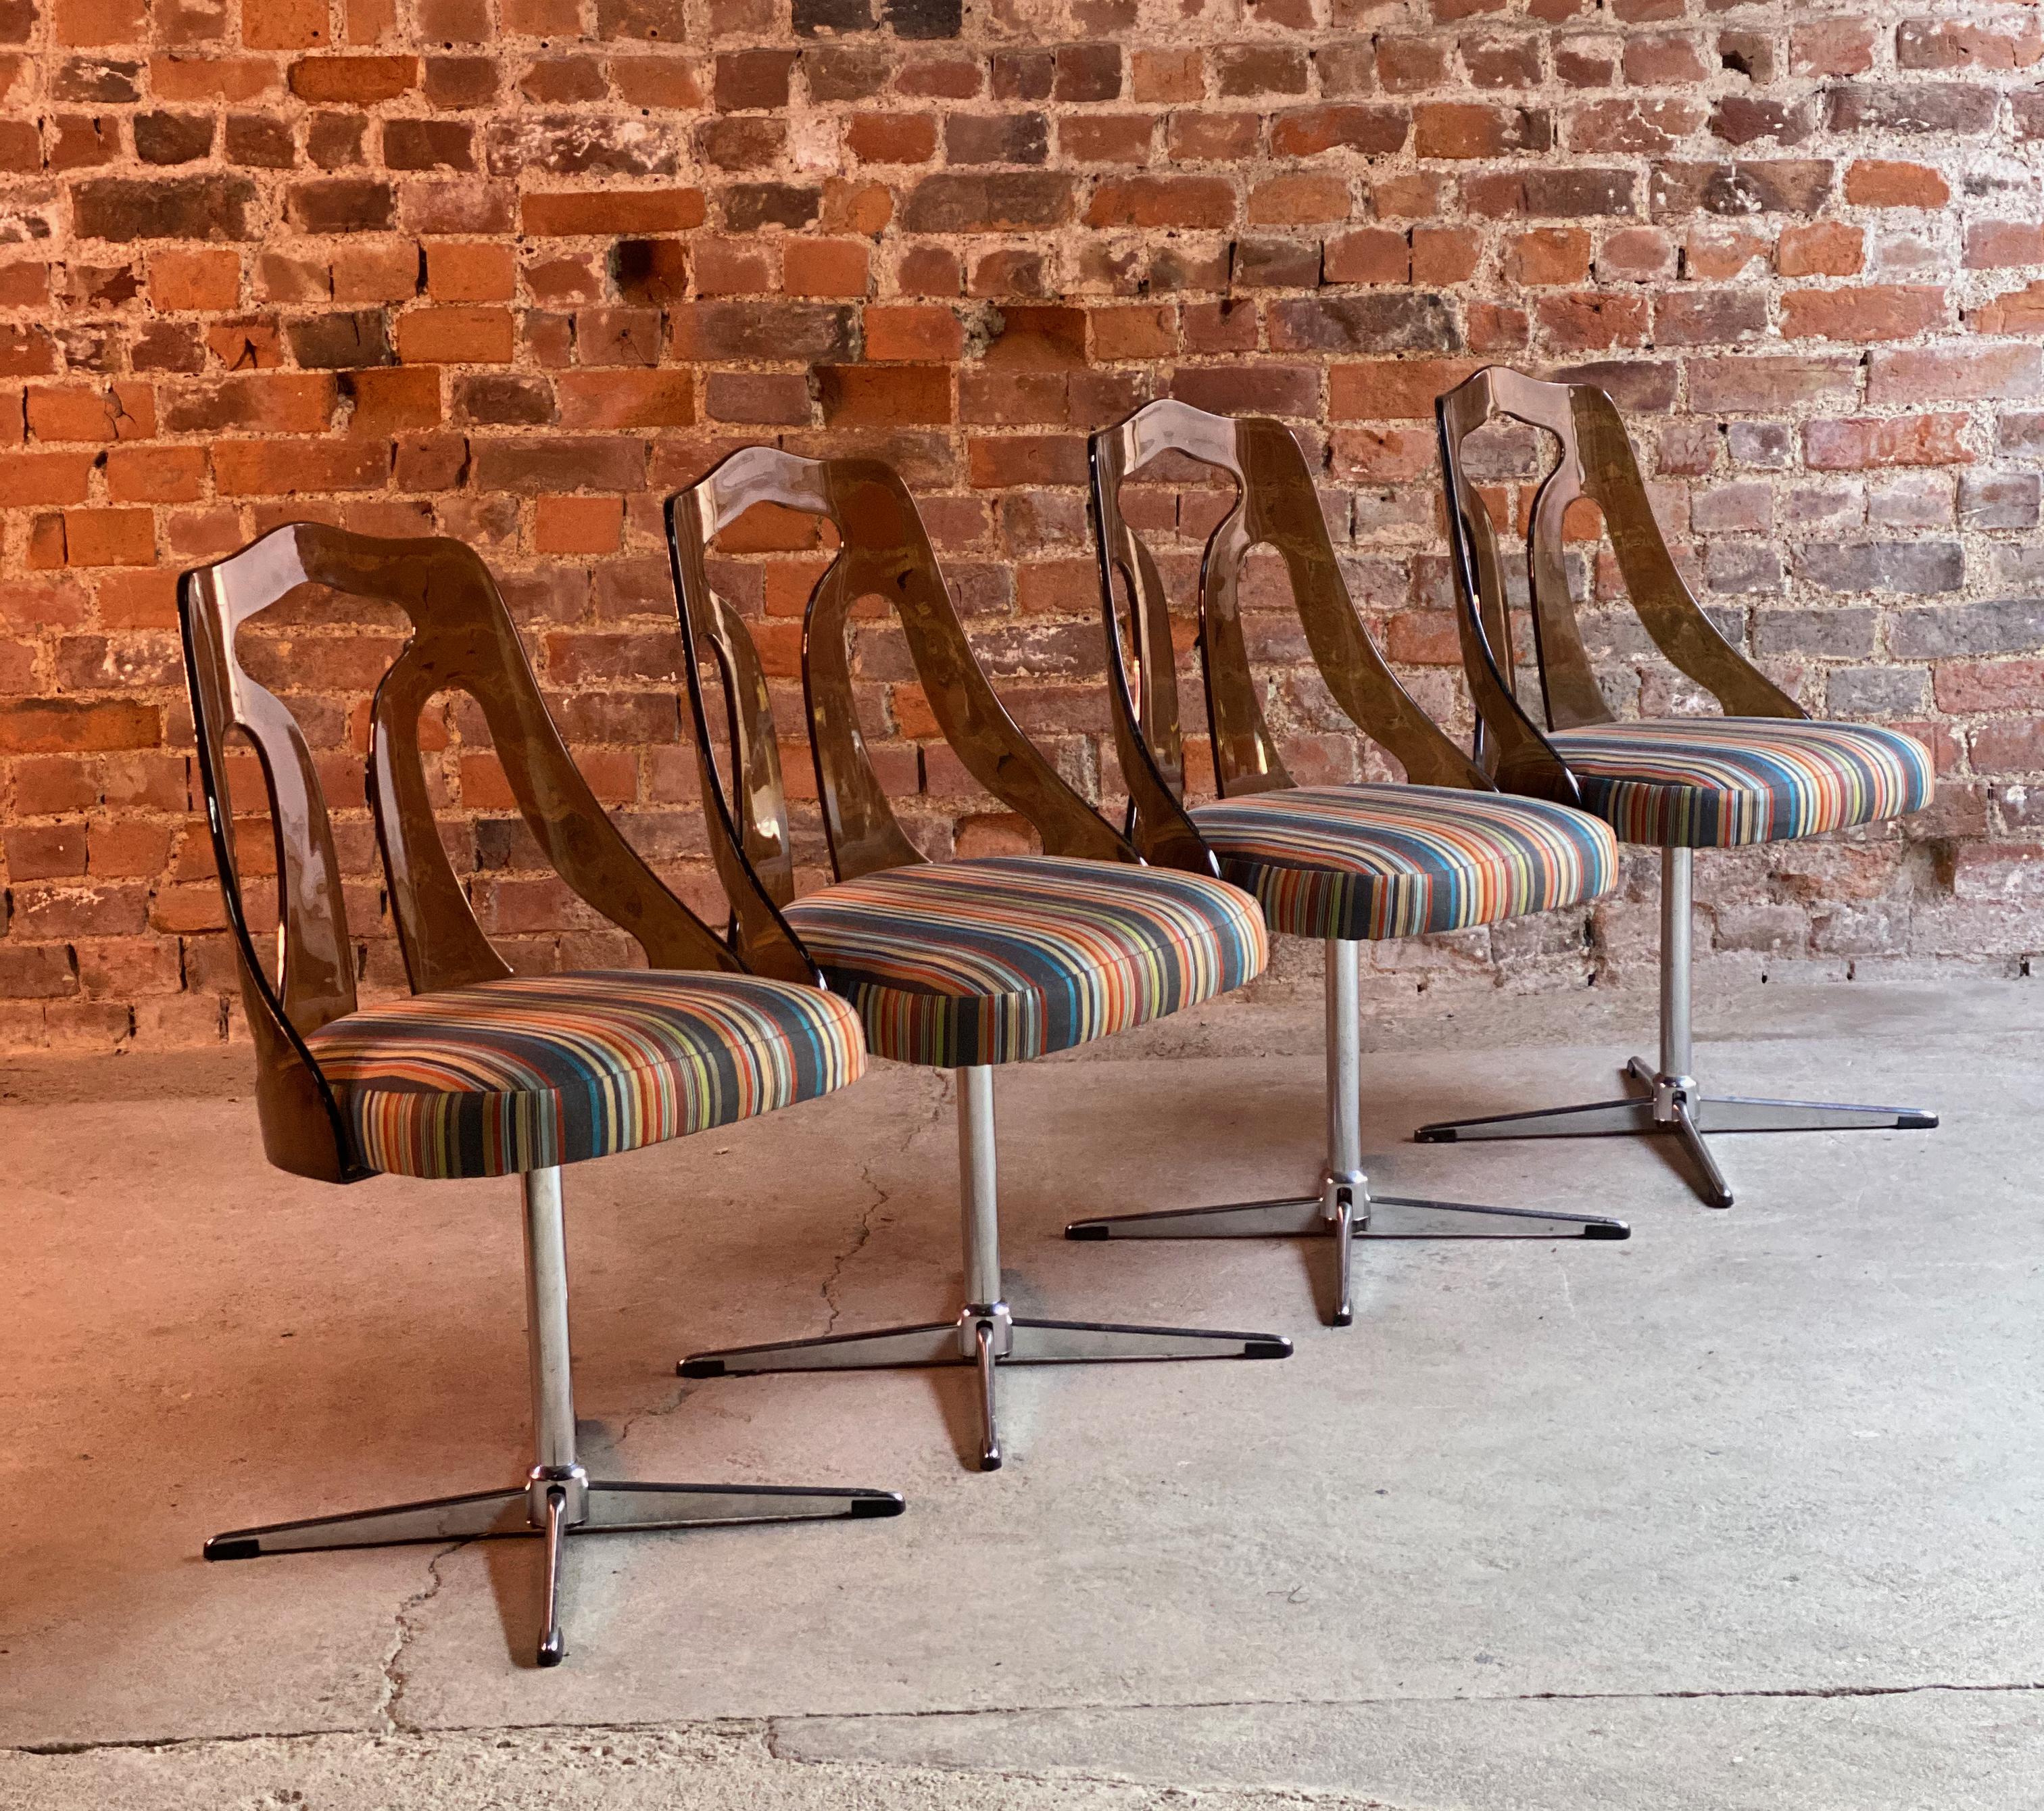 Paul Smith ottoman Maharam dining chairs set of four, circa 1960s
Magnificent set of four revolving dining chairs circa 1960s, each chair with pierced bronze Lucite back rests raised on four branch aluminium seat bases, upholstered in Paul Smith